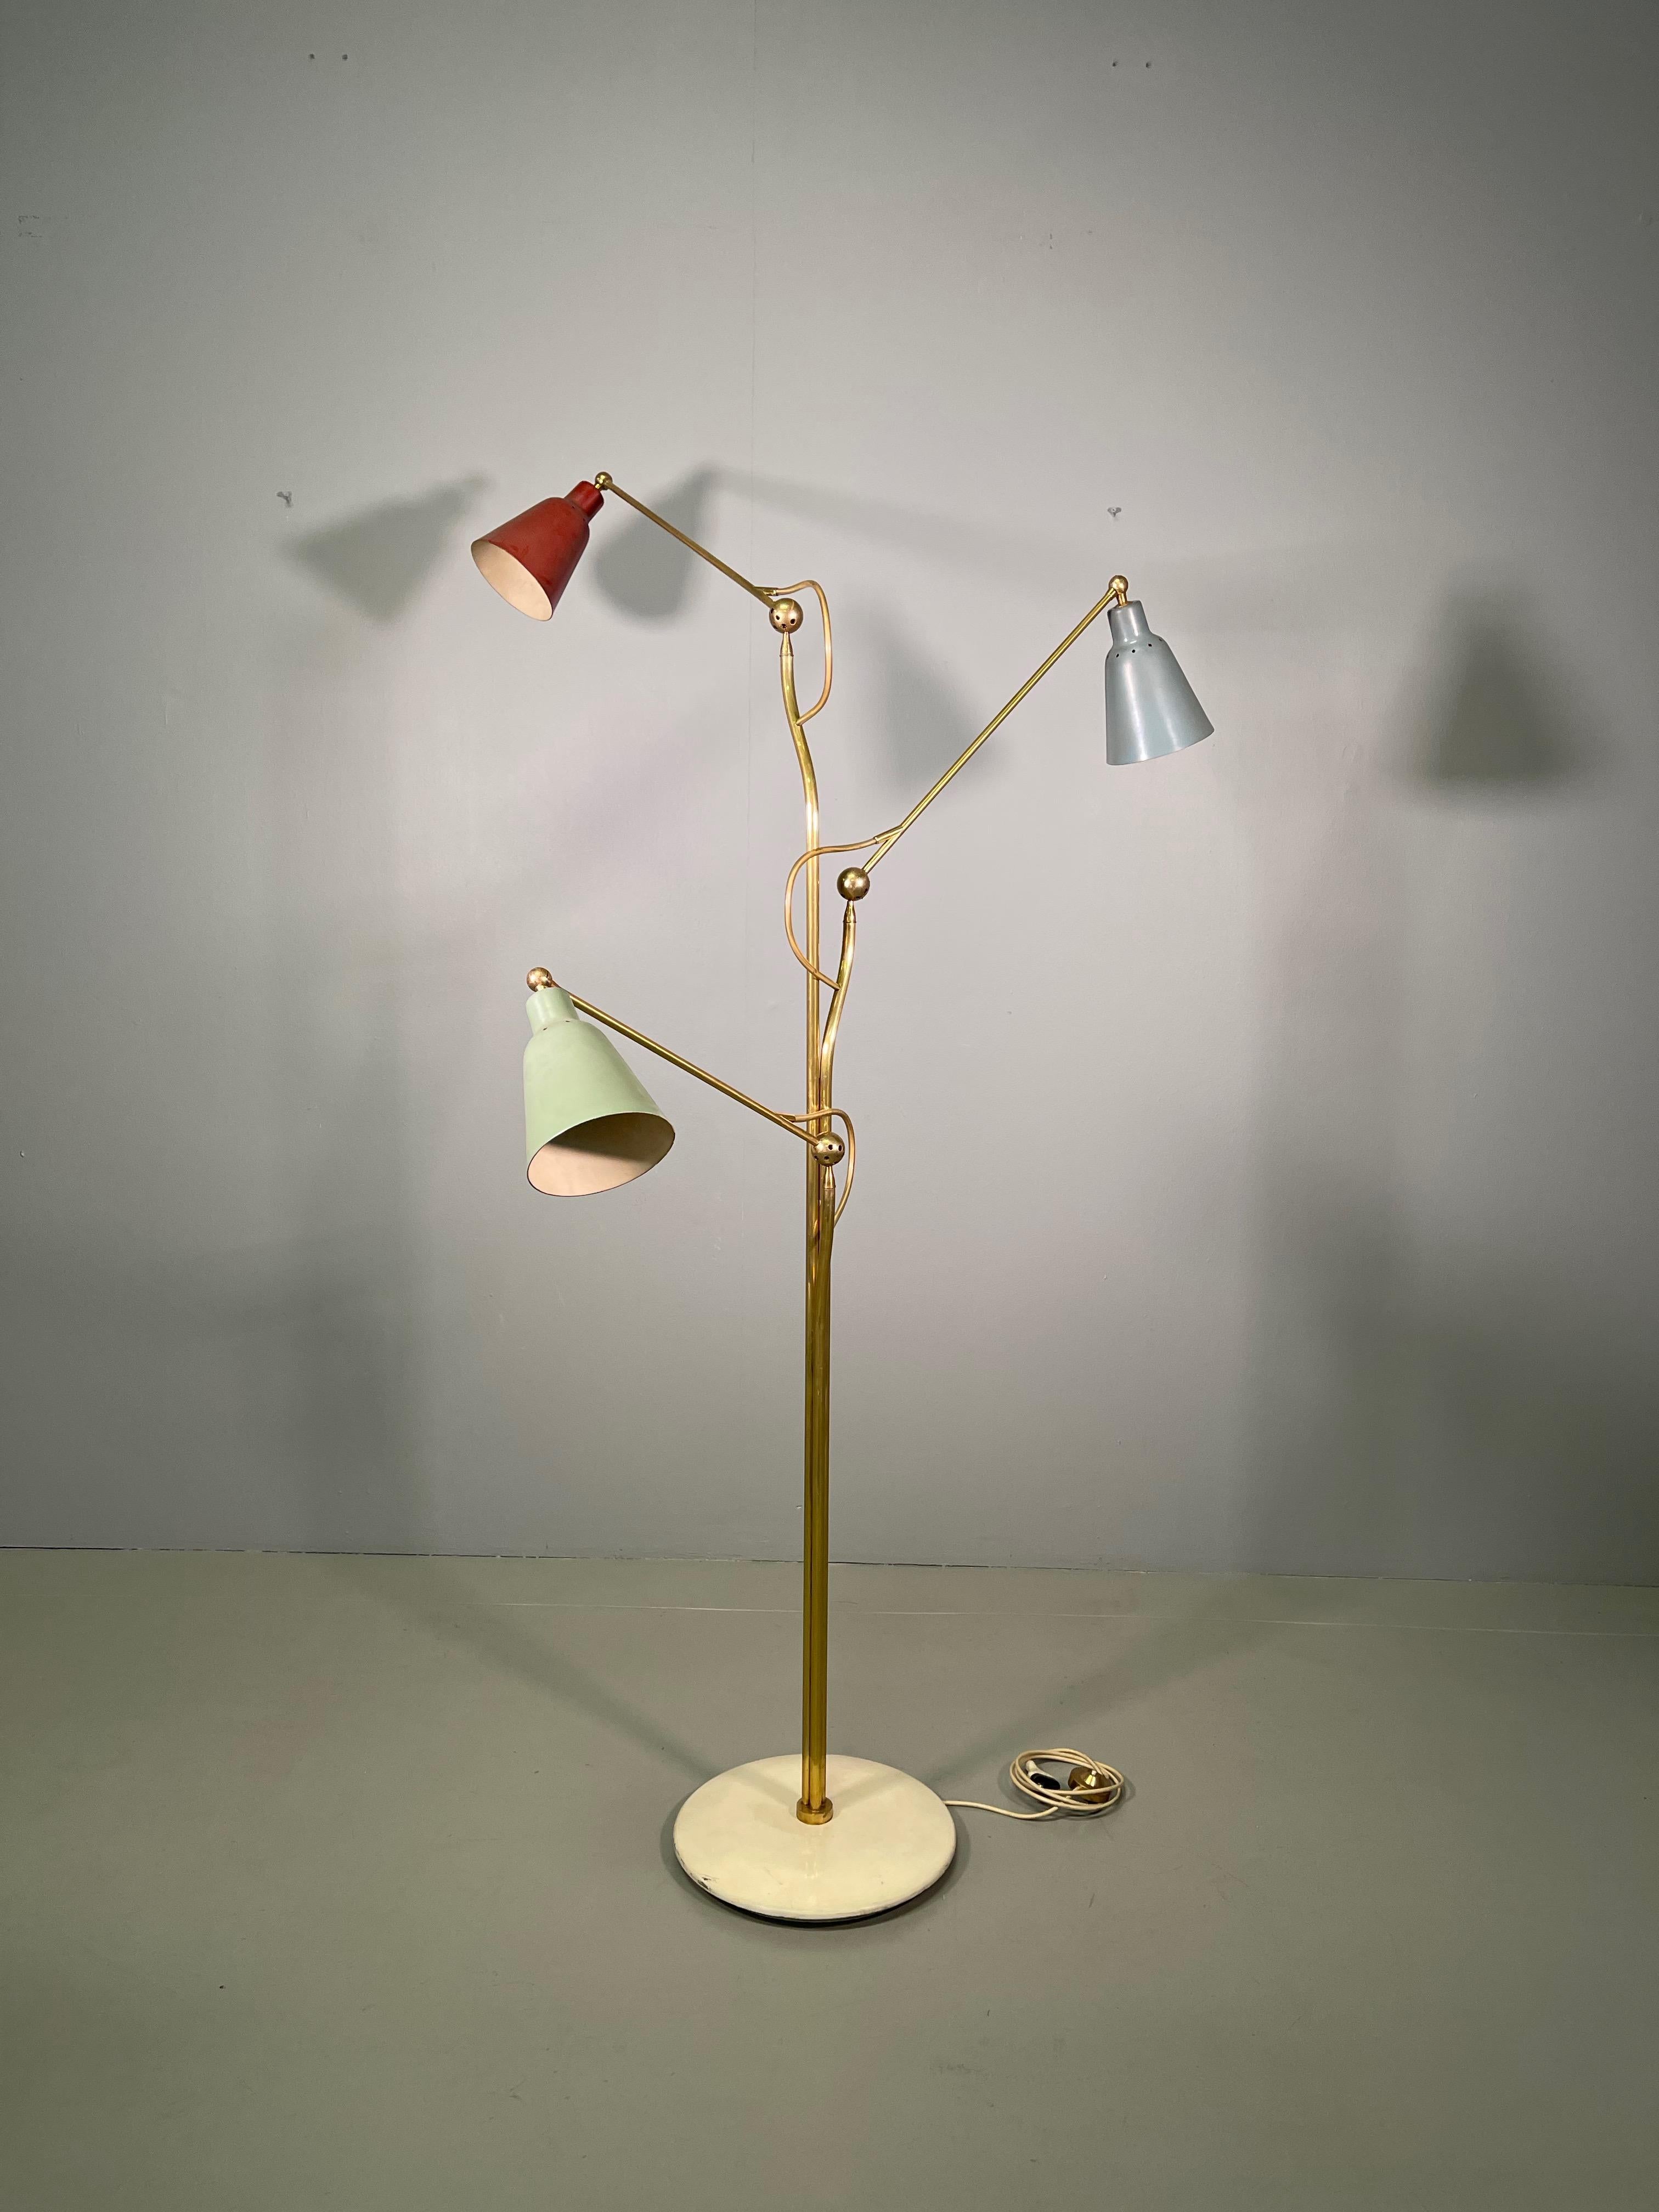 Angelo Lelii for Arredoluce, floor lamp, metal, brass, Italy, 1950s 
This iconic floor lamp was designed by Angelo Lelli and manufactured by Arredoluce, Italy in 1950. 
This lamp was a symbol of the 1950s, due to its fixtures. It was designed in